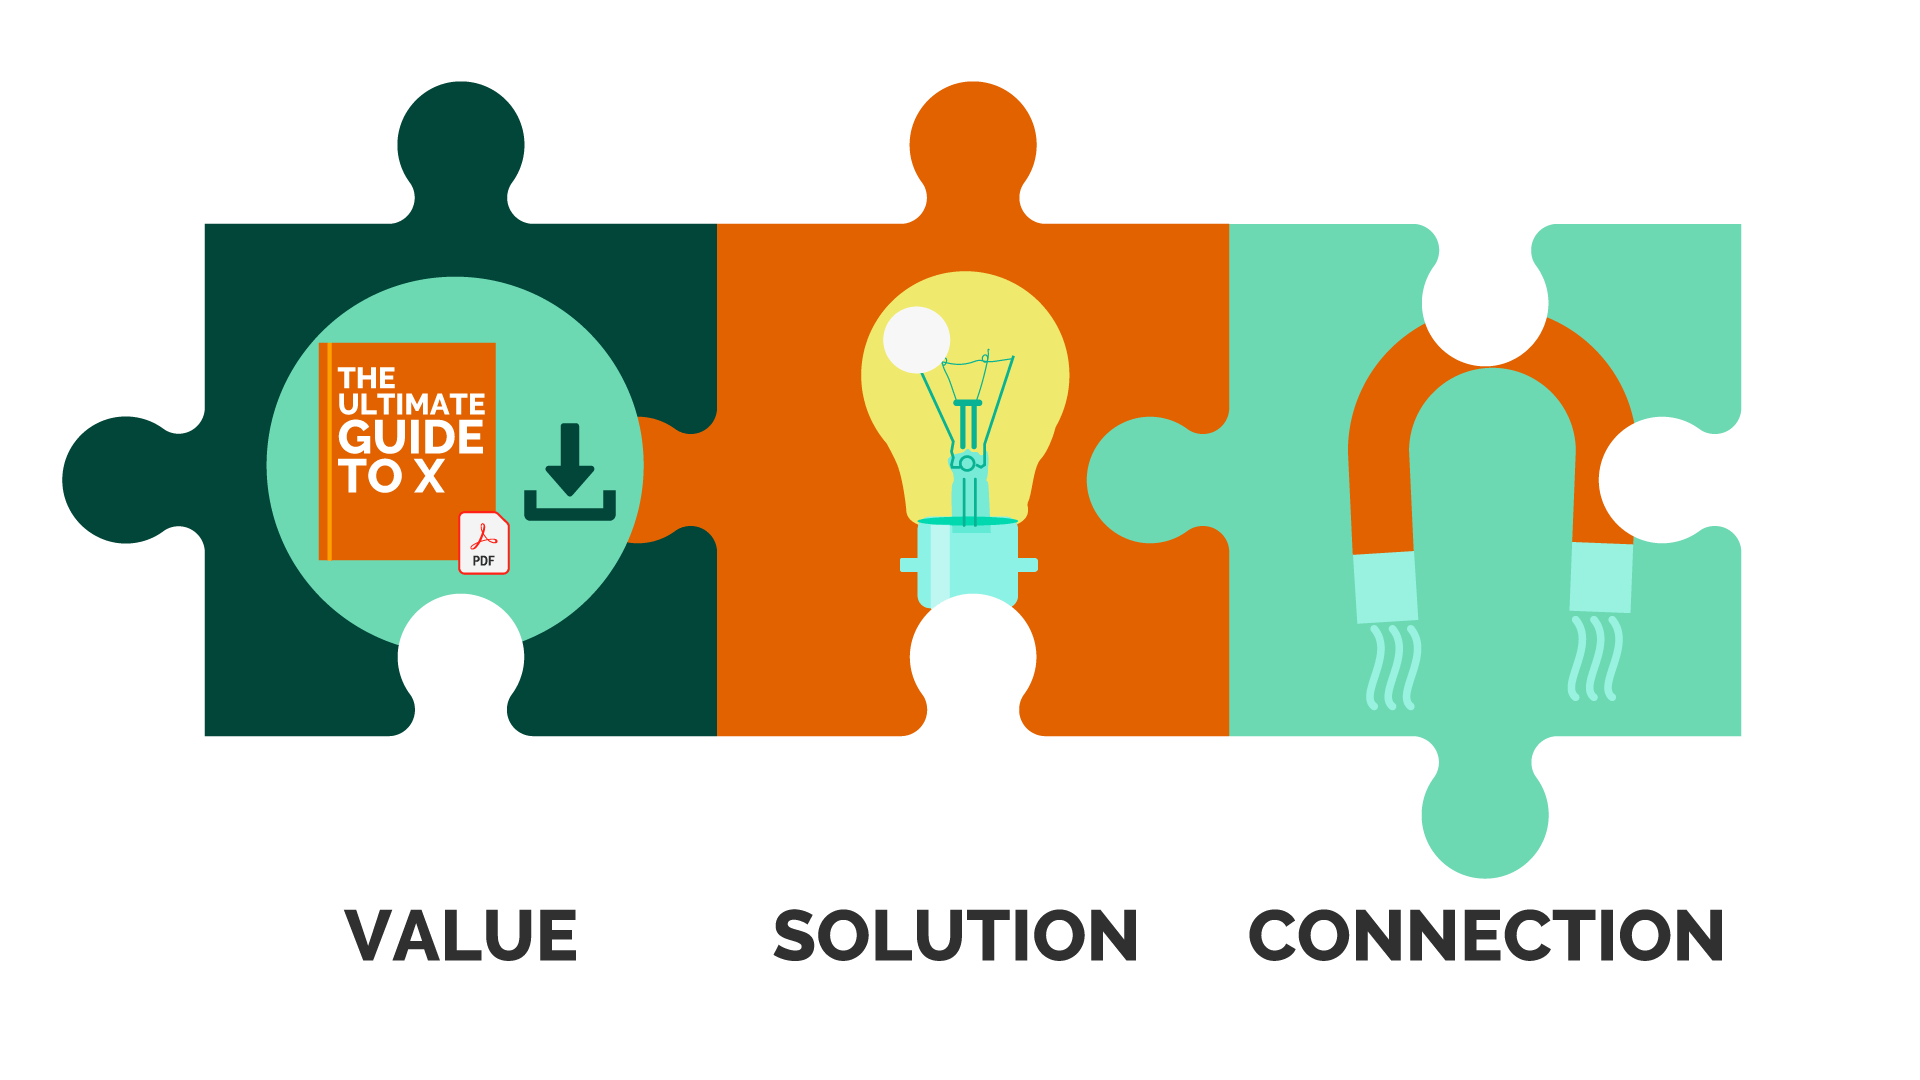 Connect value, solution and connection